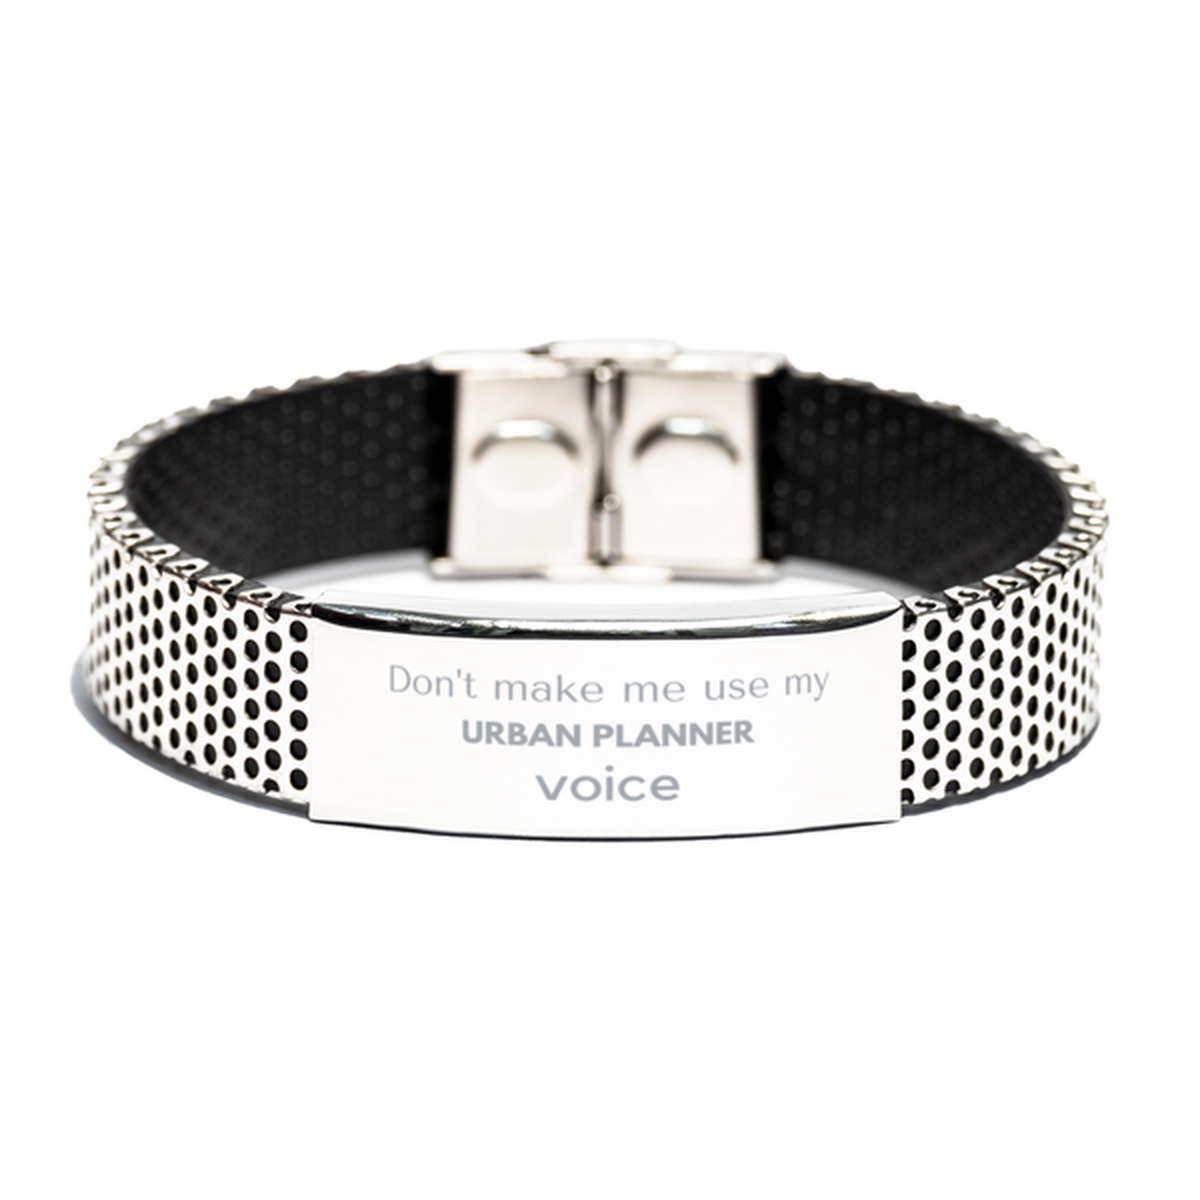 Don't make me use my Urban Planner voice, Sarcasm Urban Planner Gifts, Christmas Urban Planner Stainless Steel Bracelet Birthday Unique Gifts For Urban Planner Coworkers, Men, Women, Colleague, Friends